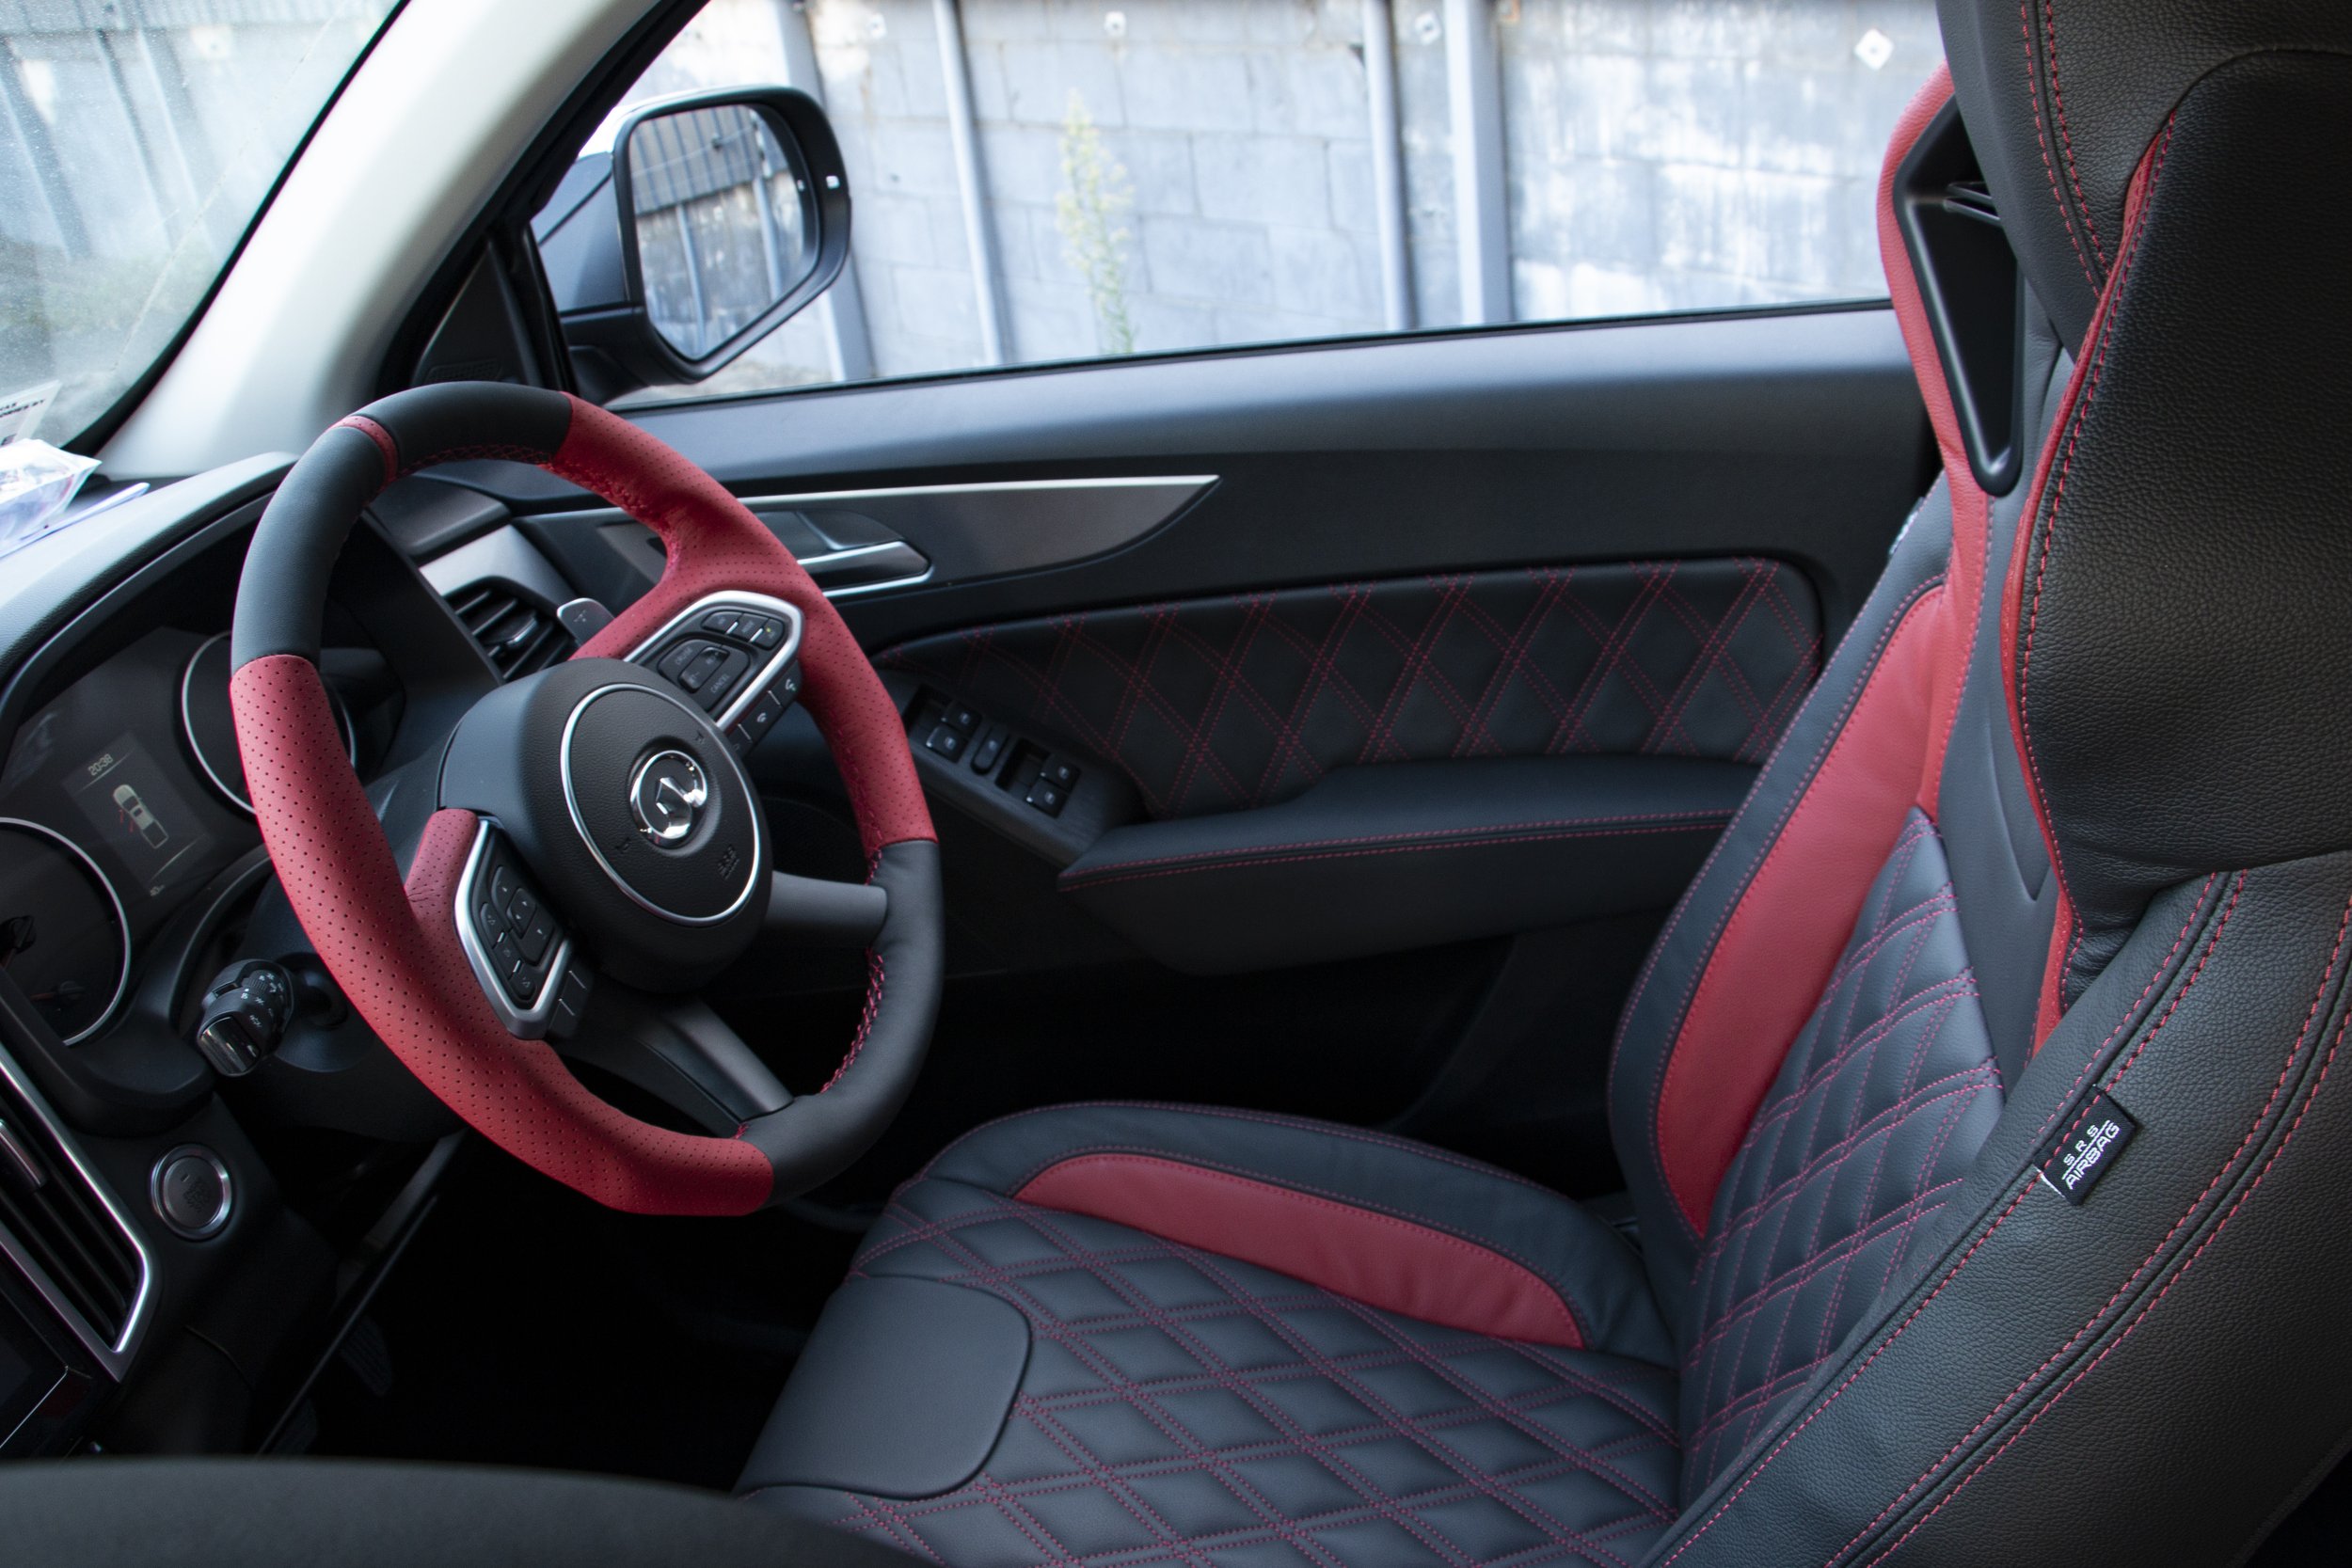 GWM Cannon with black and red interior 9.jpg